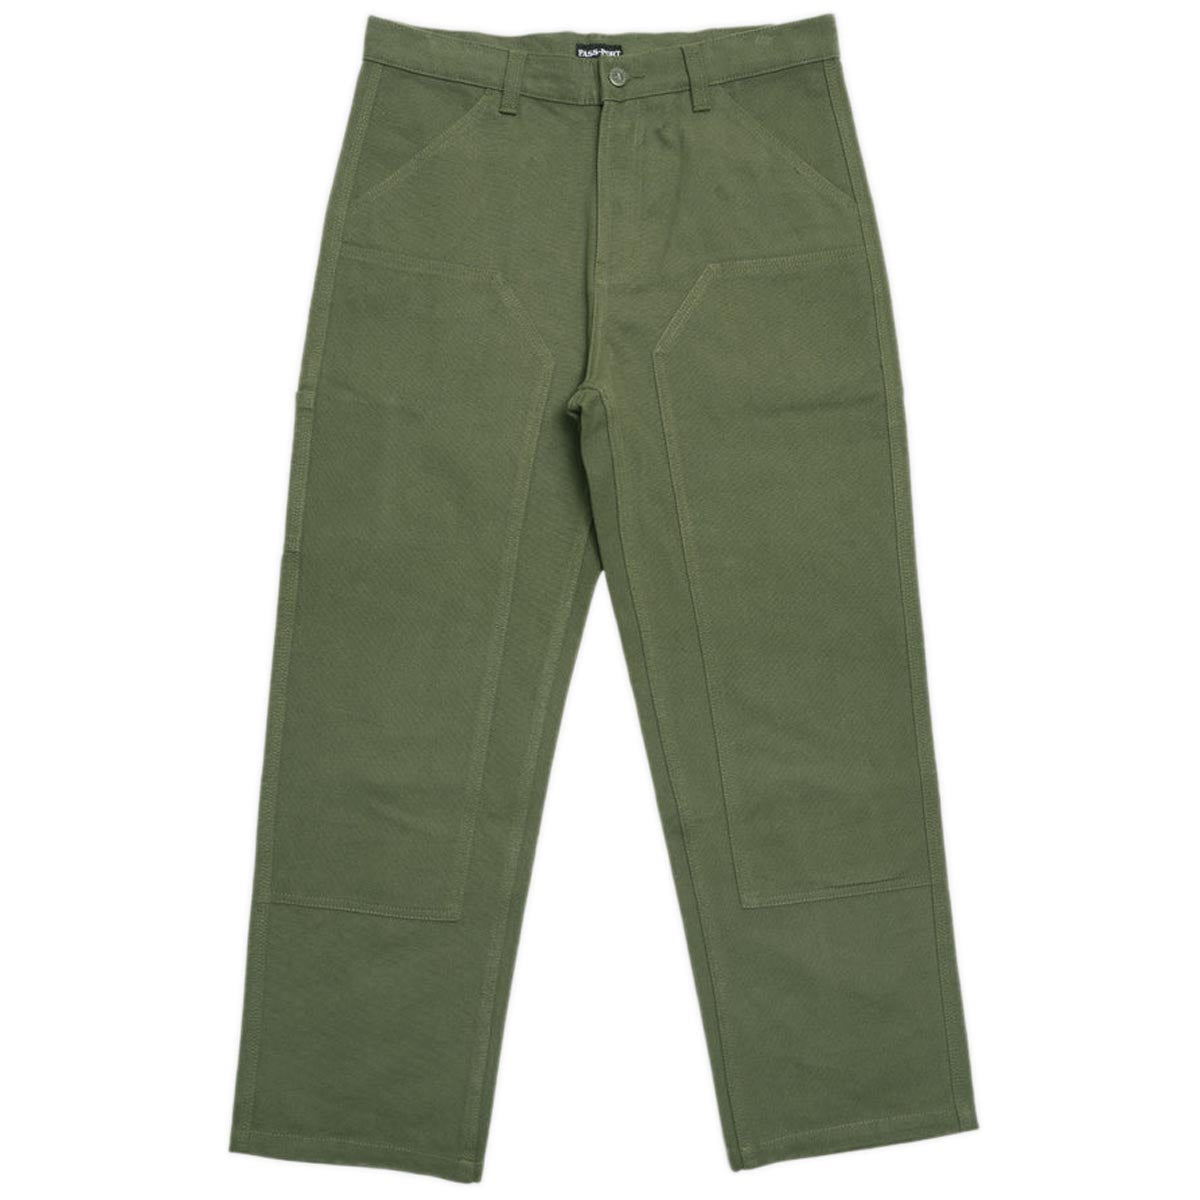 Passport Double Knee Diggers Club Pants - Olive image 1